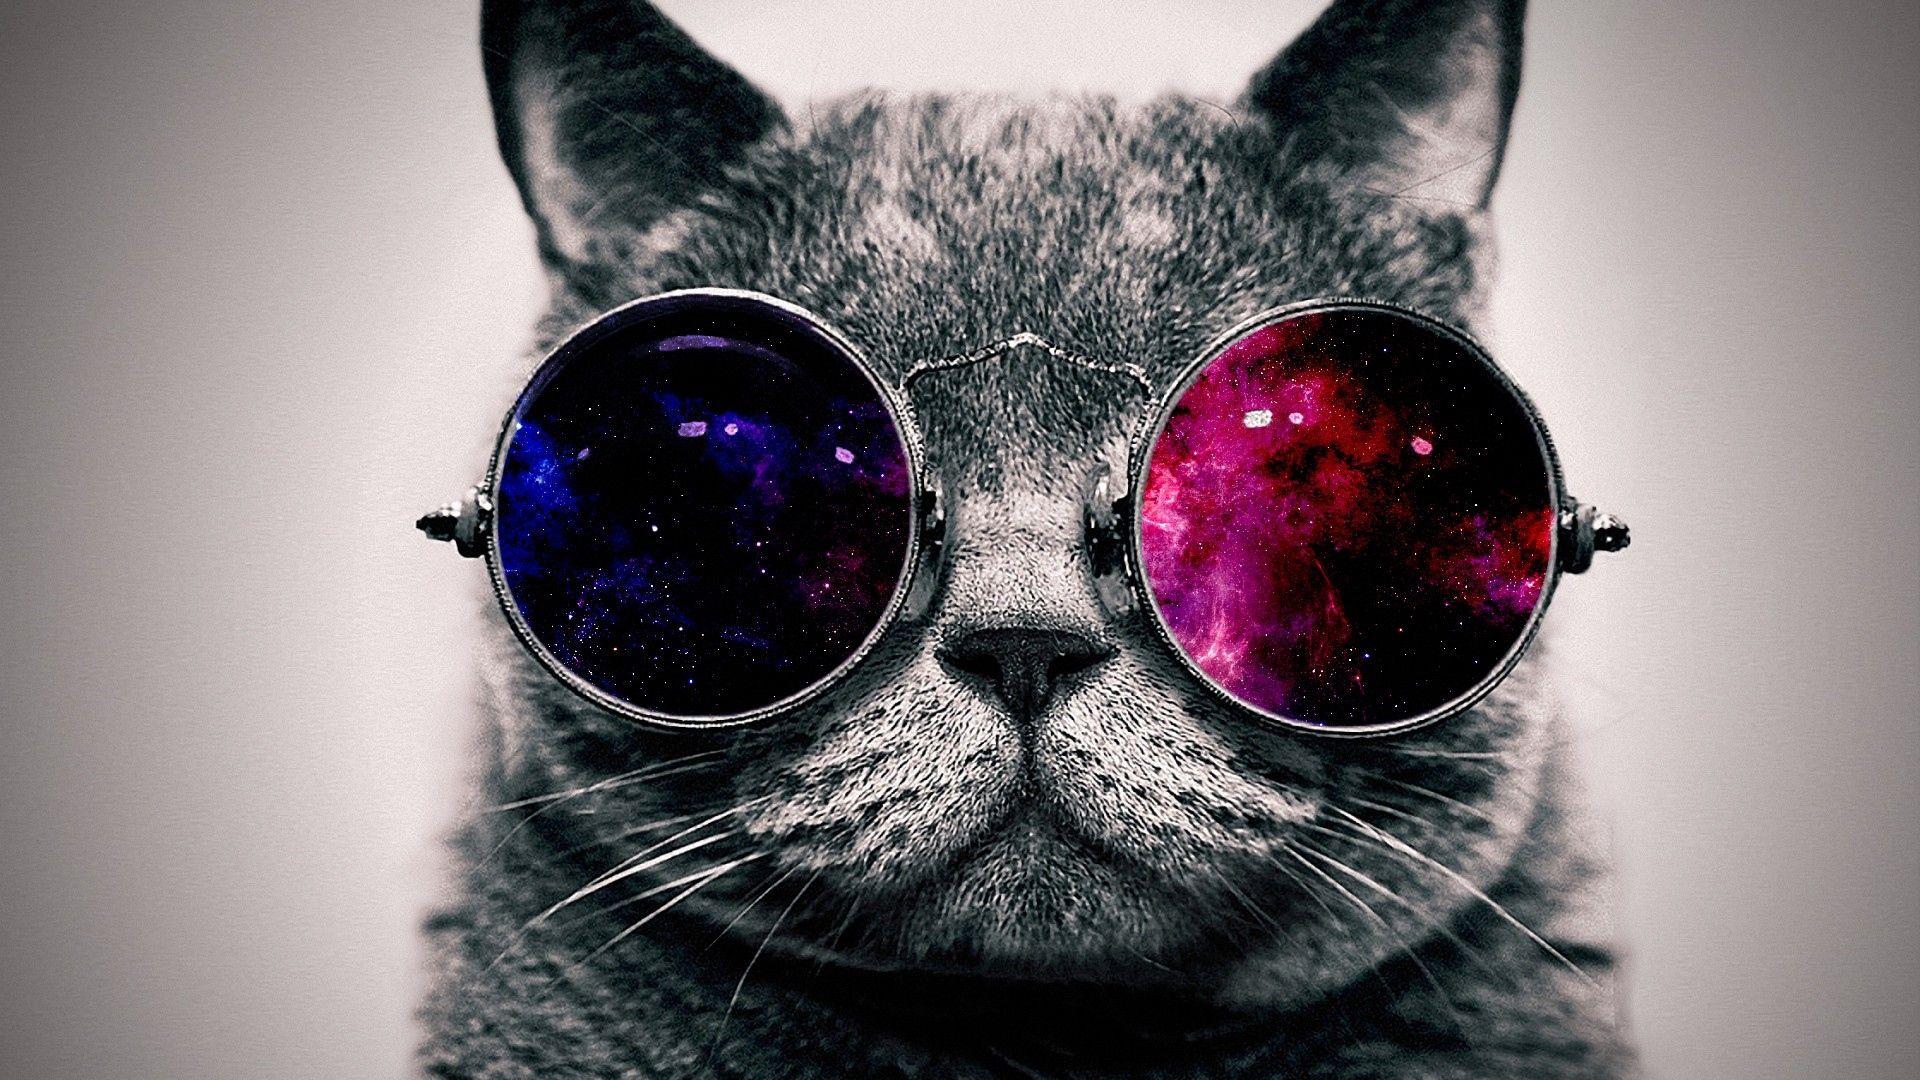 Download wallpapers 1920x1080 cat, face, glasses, thick full hd, hdtv